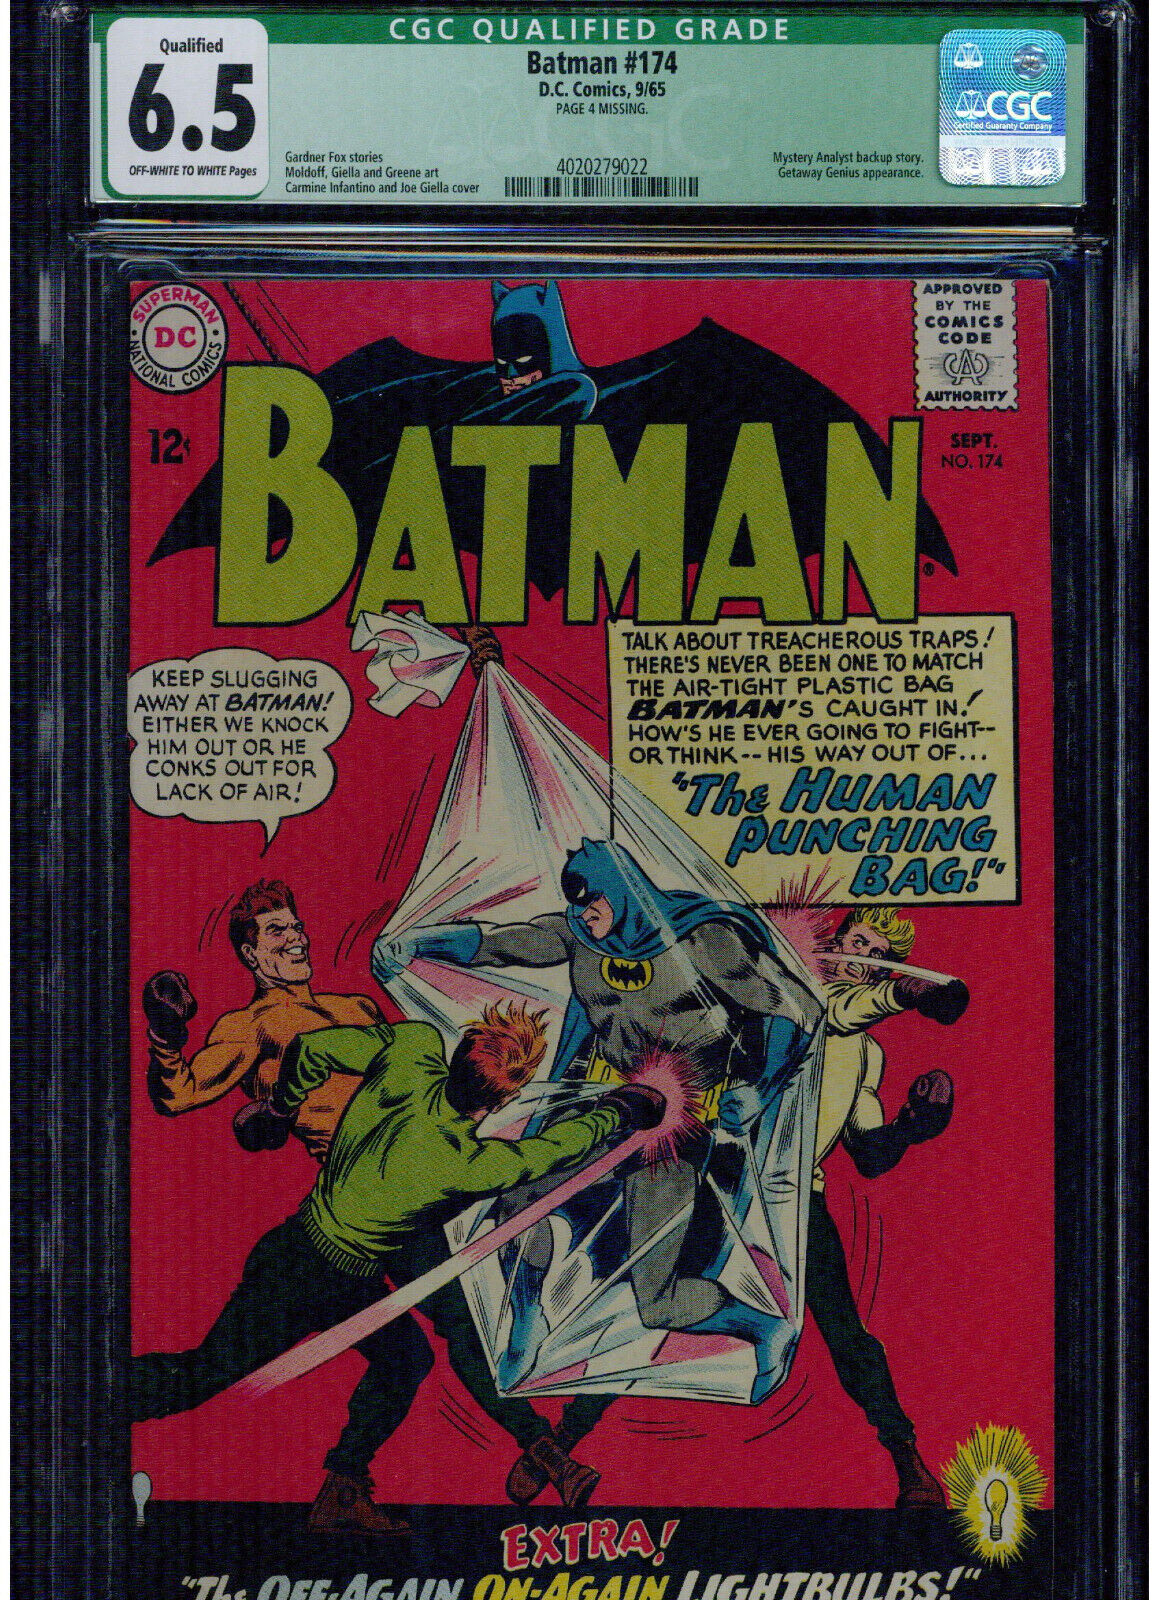 BATMAN #174 CGC 6.5 QUALIFY MISSING PG. 4 1965 OTHER WISE  VERY SHARP